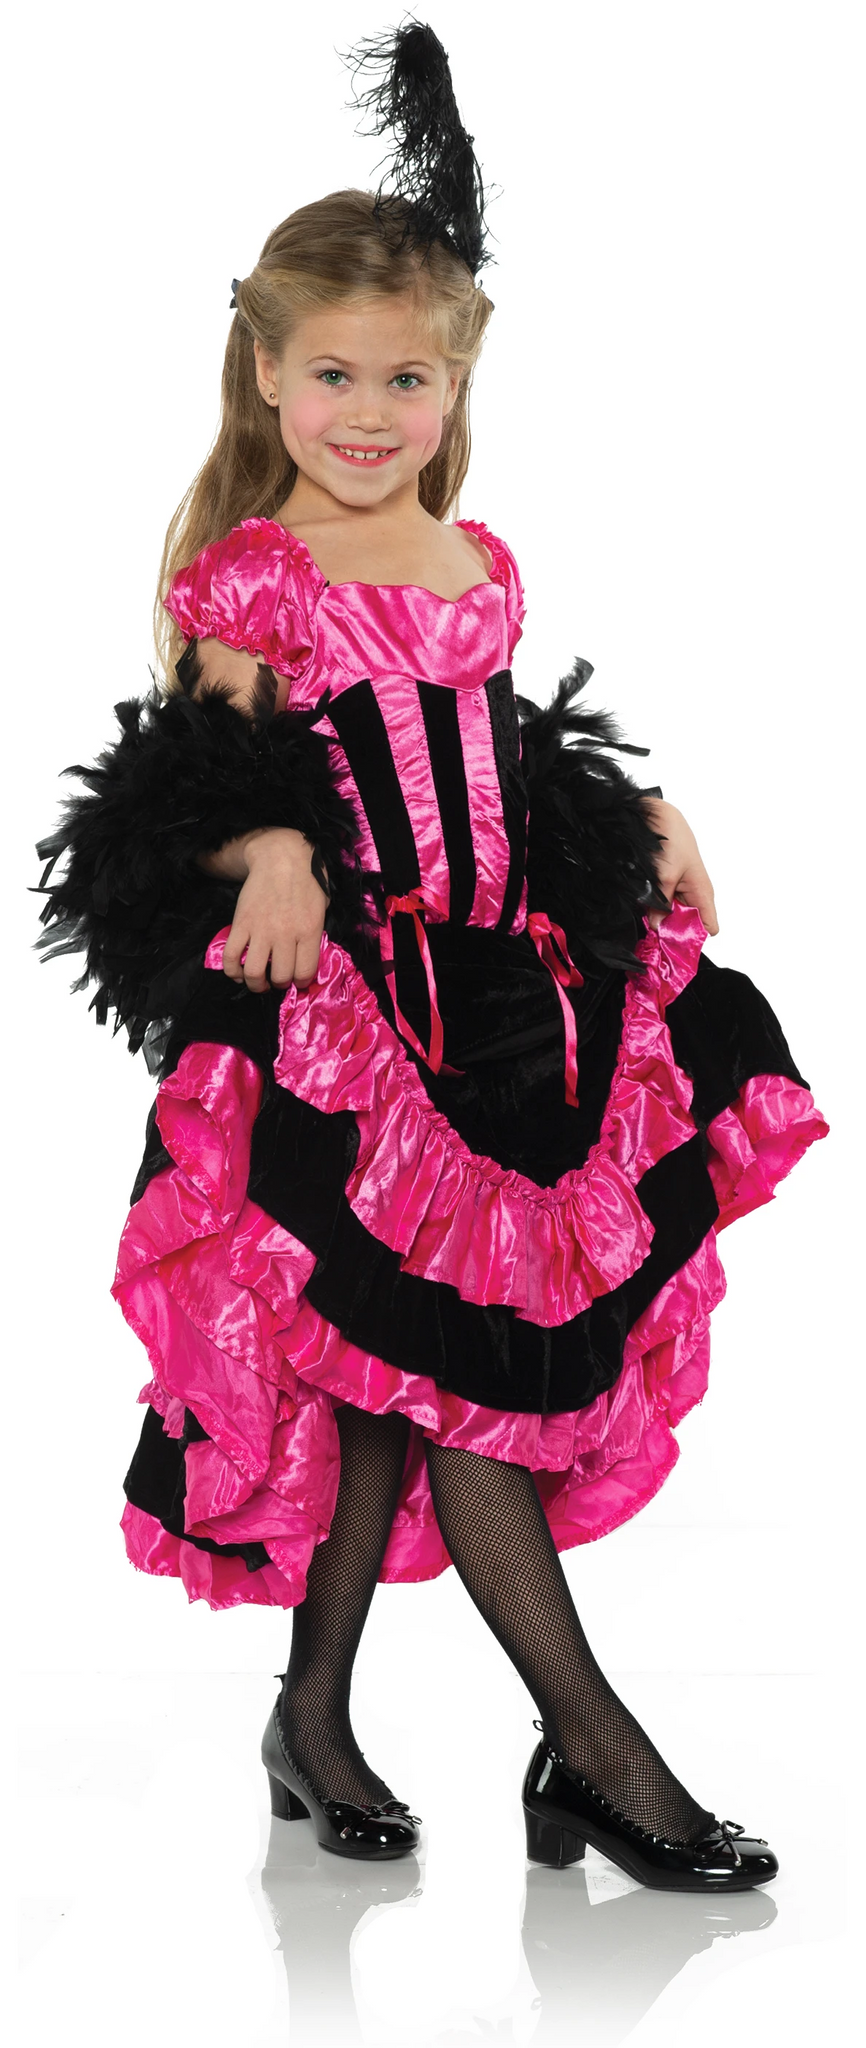 Black and pink with ruffles and bows